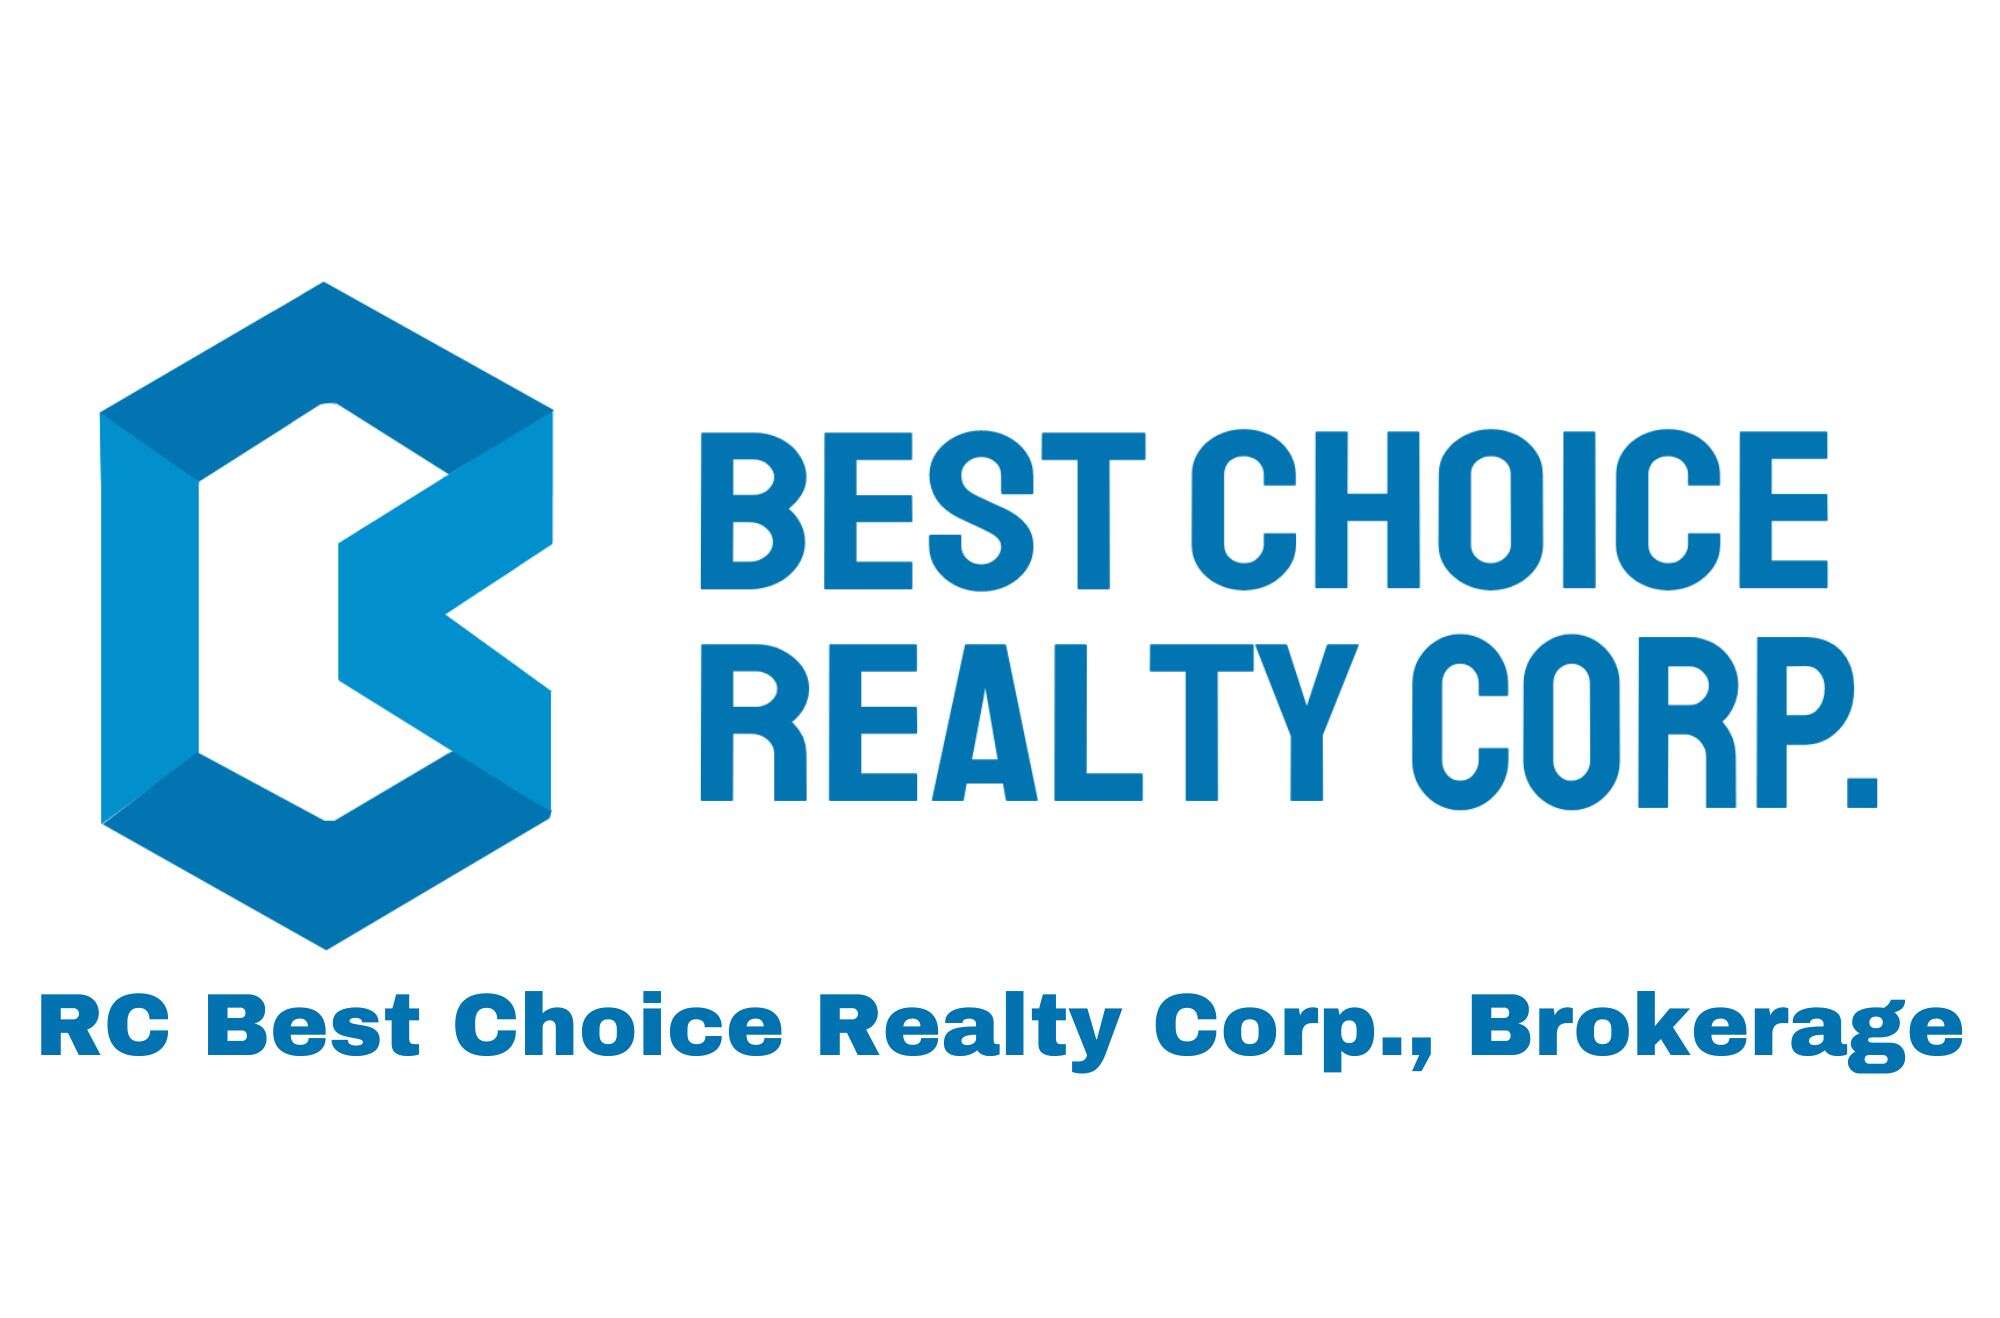 Best Choice Realty Corp. Brokerage